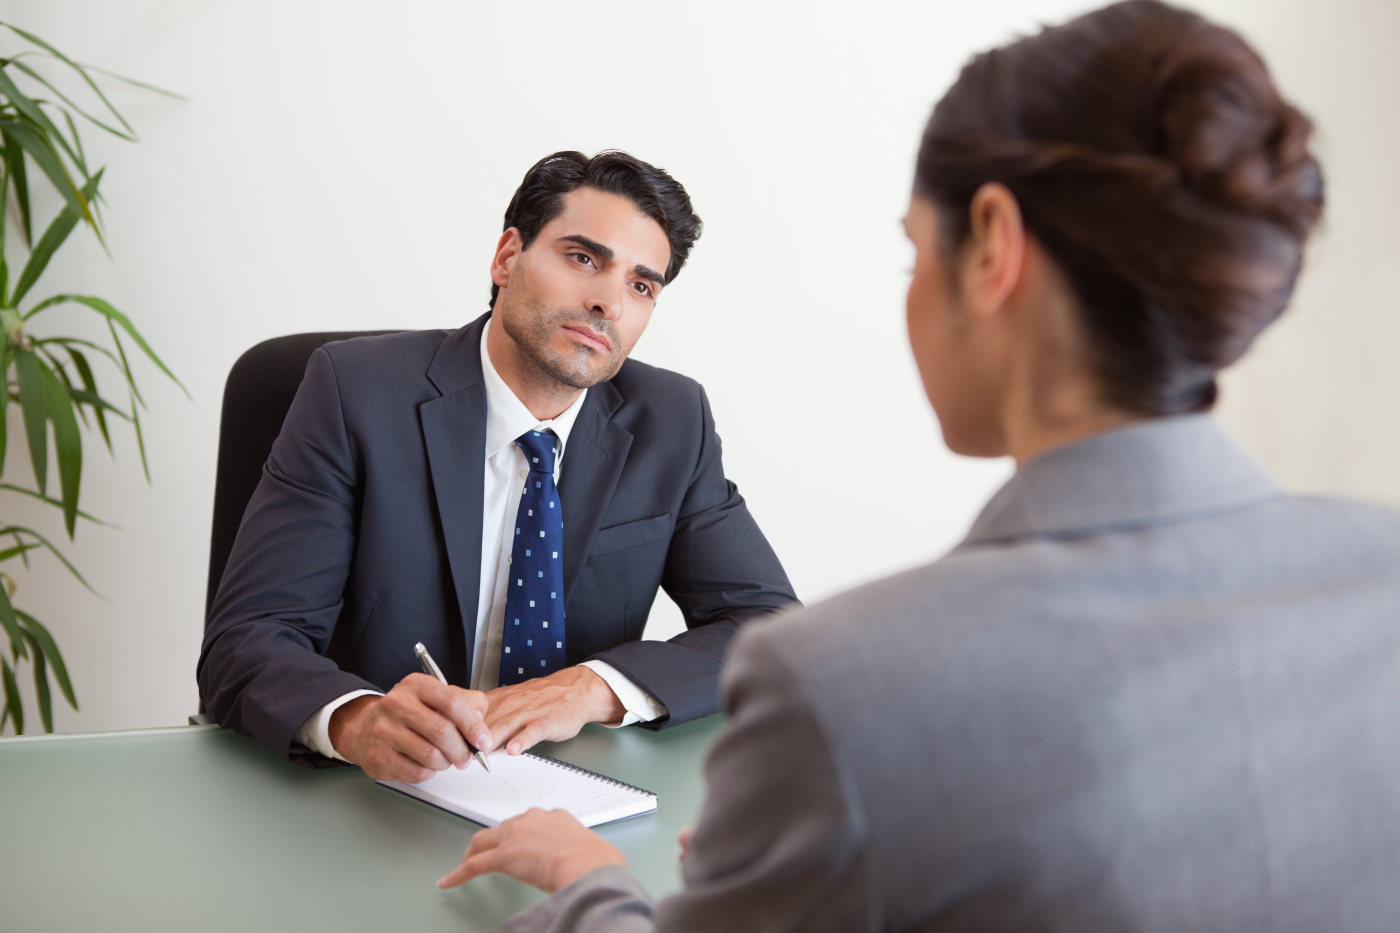 Did the interview go wrong? Here’s what you need to do now